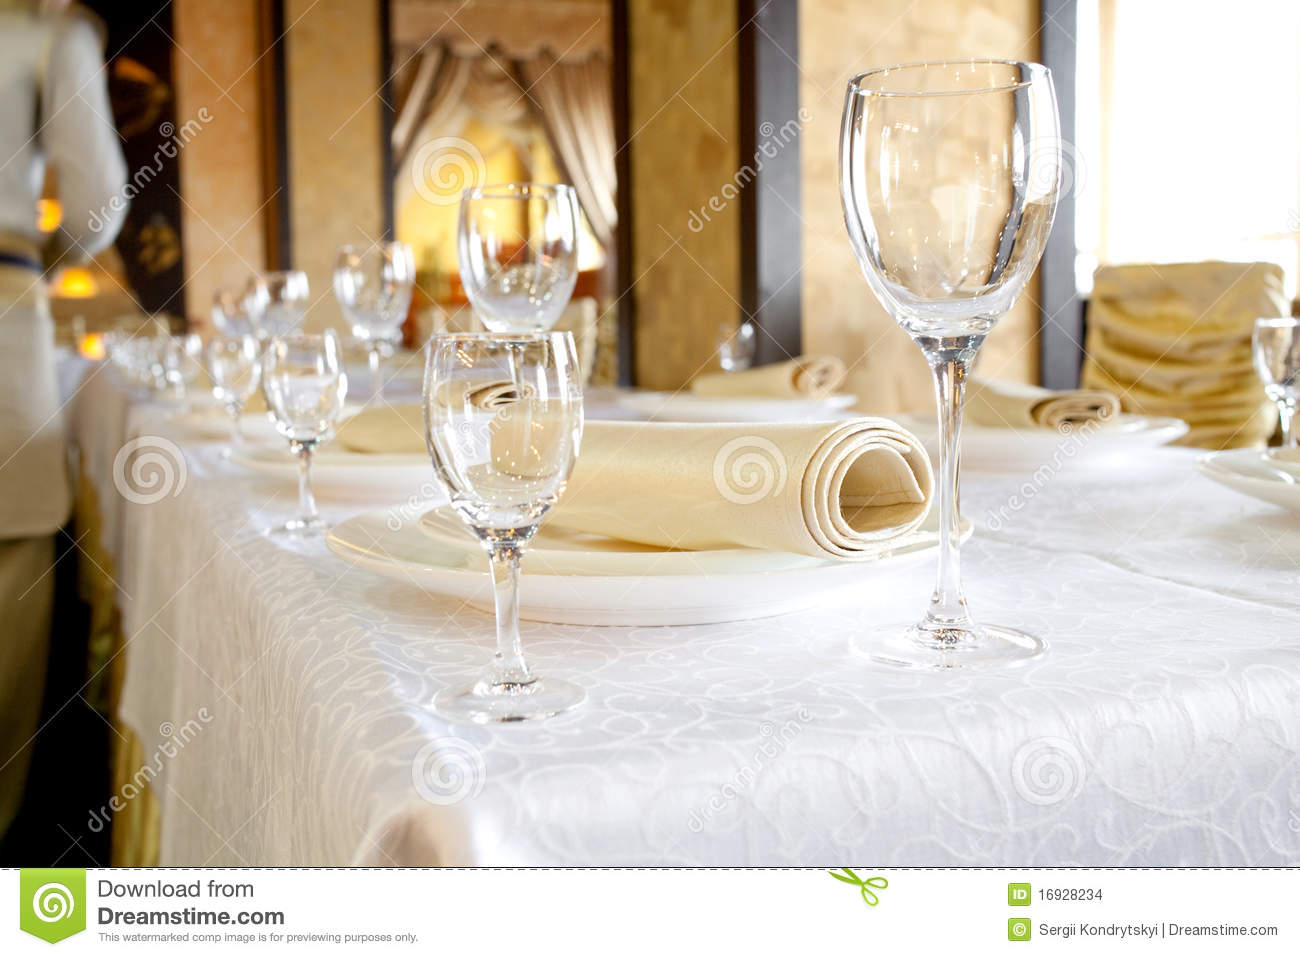 Banquet Table Stock Images   Image  16928234